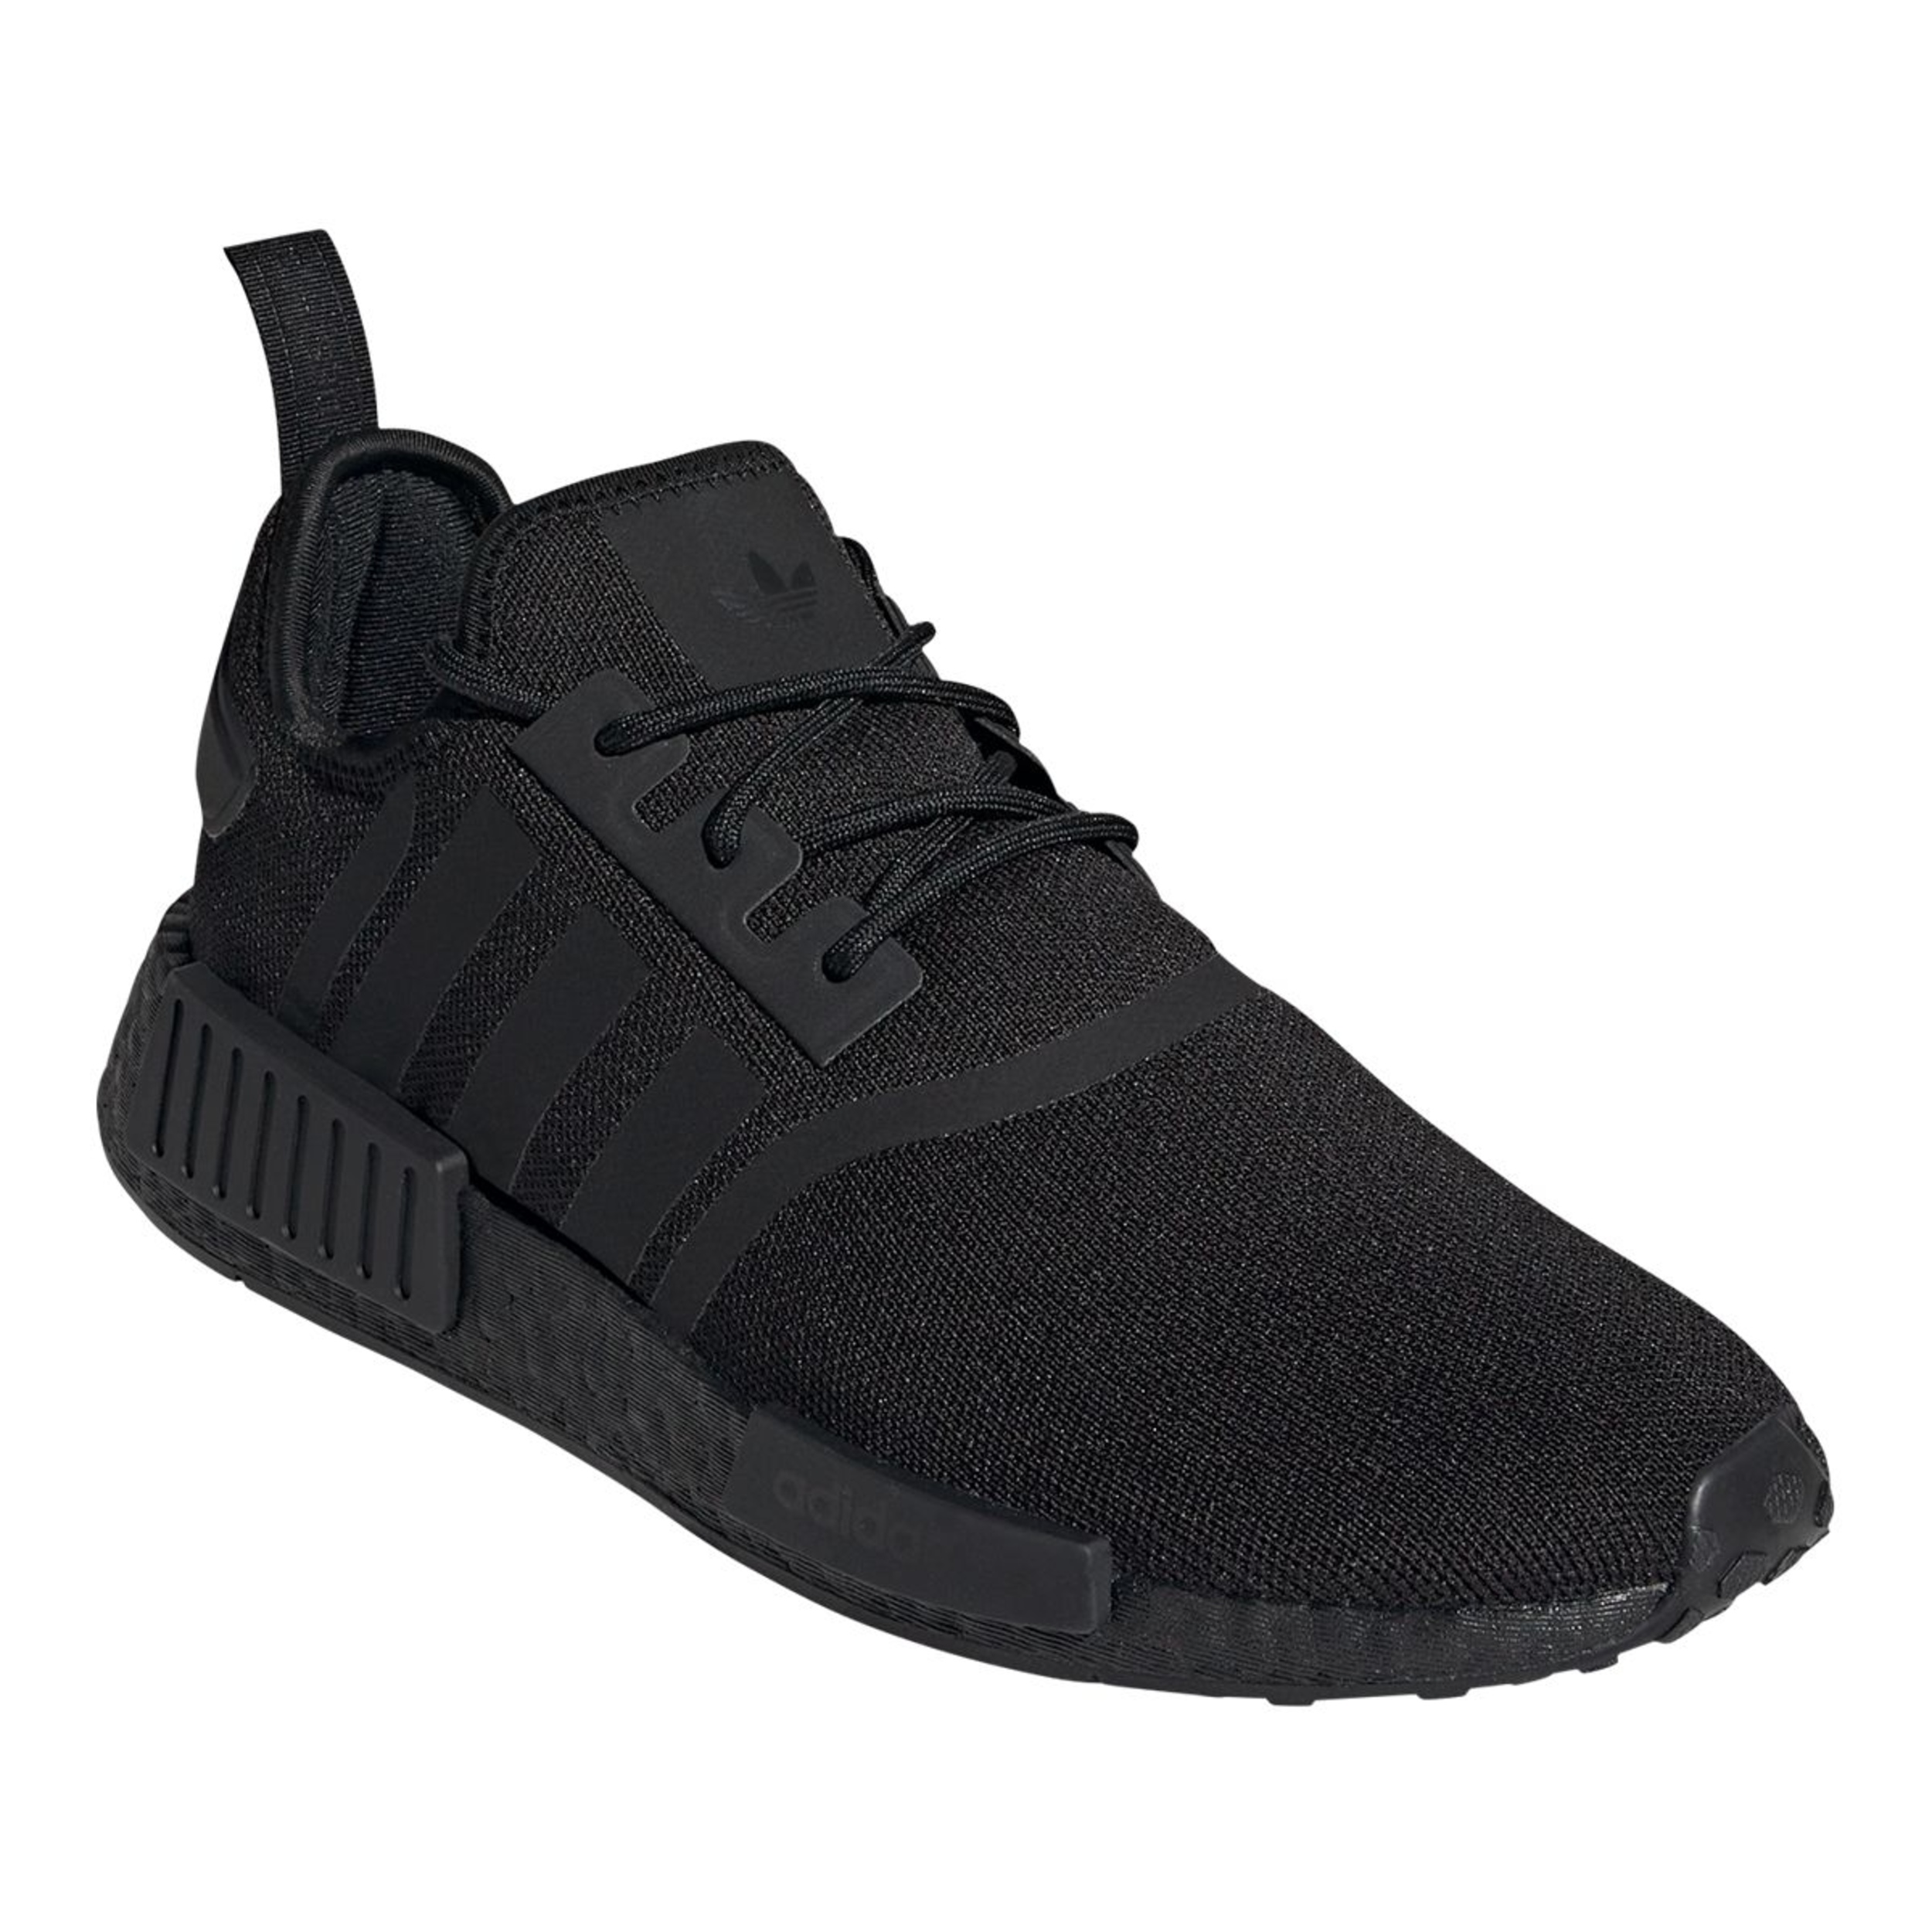 adidas Men's NMD_R1 Boost Shoes, Sneakers, Knit | SportChek